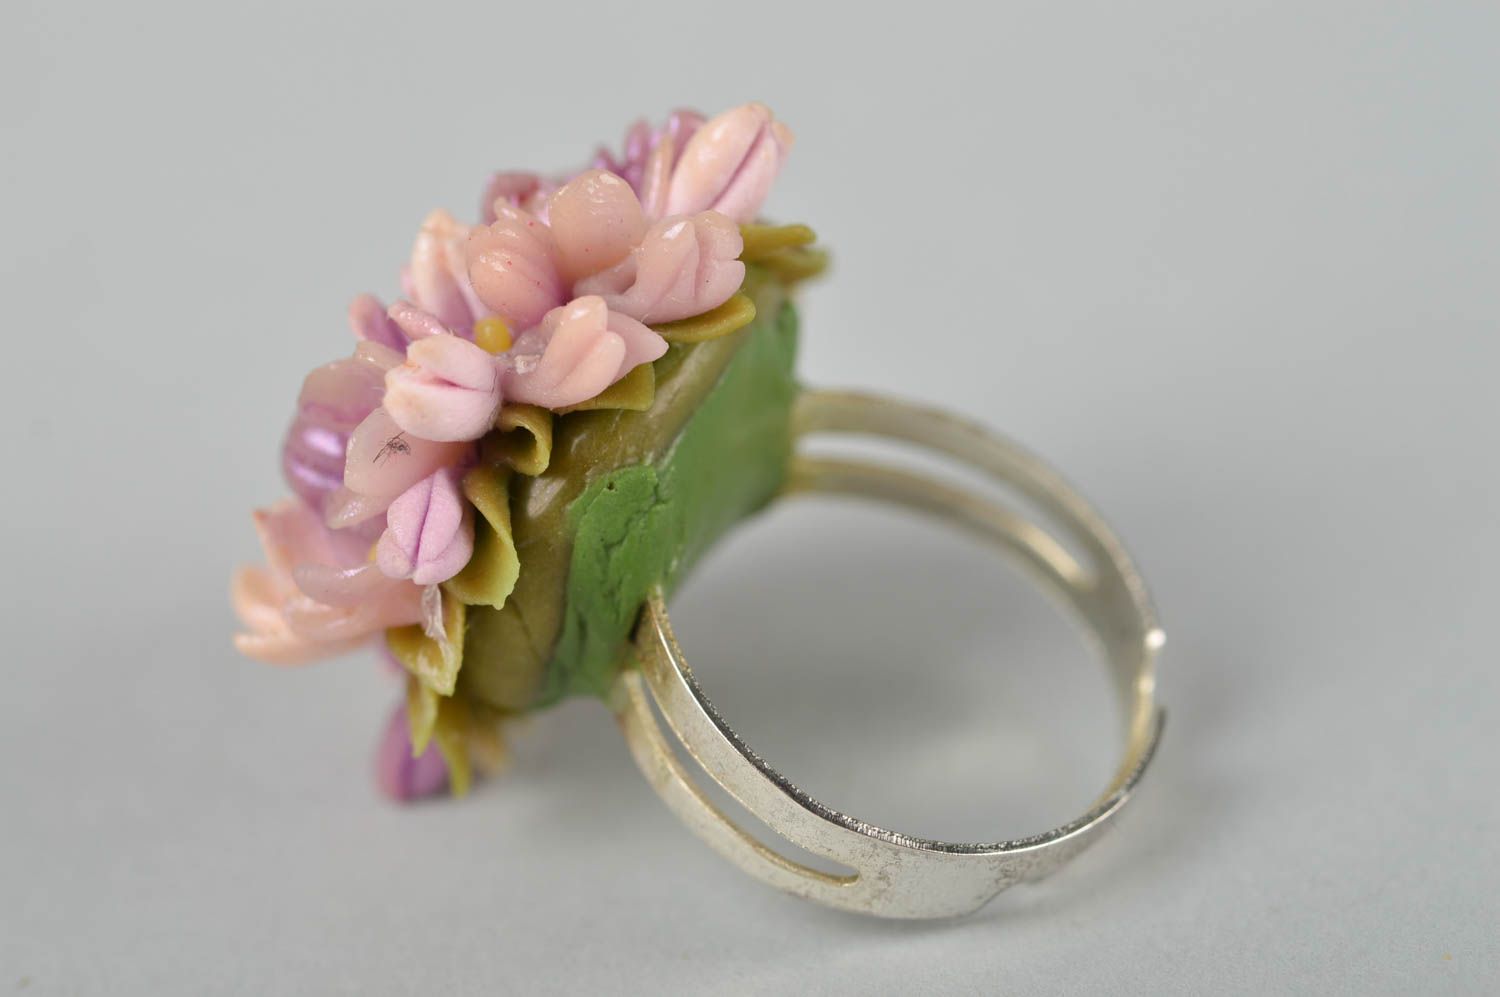 Buy Five-flowers-ring, Enchanting Flower Ring With Rose and Tourmaline,  Handcrafted and Enameled by Iris Schamberger, Fairytale Jewellery Online in  India - Etsy